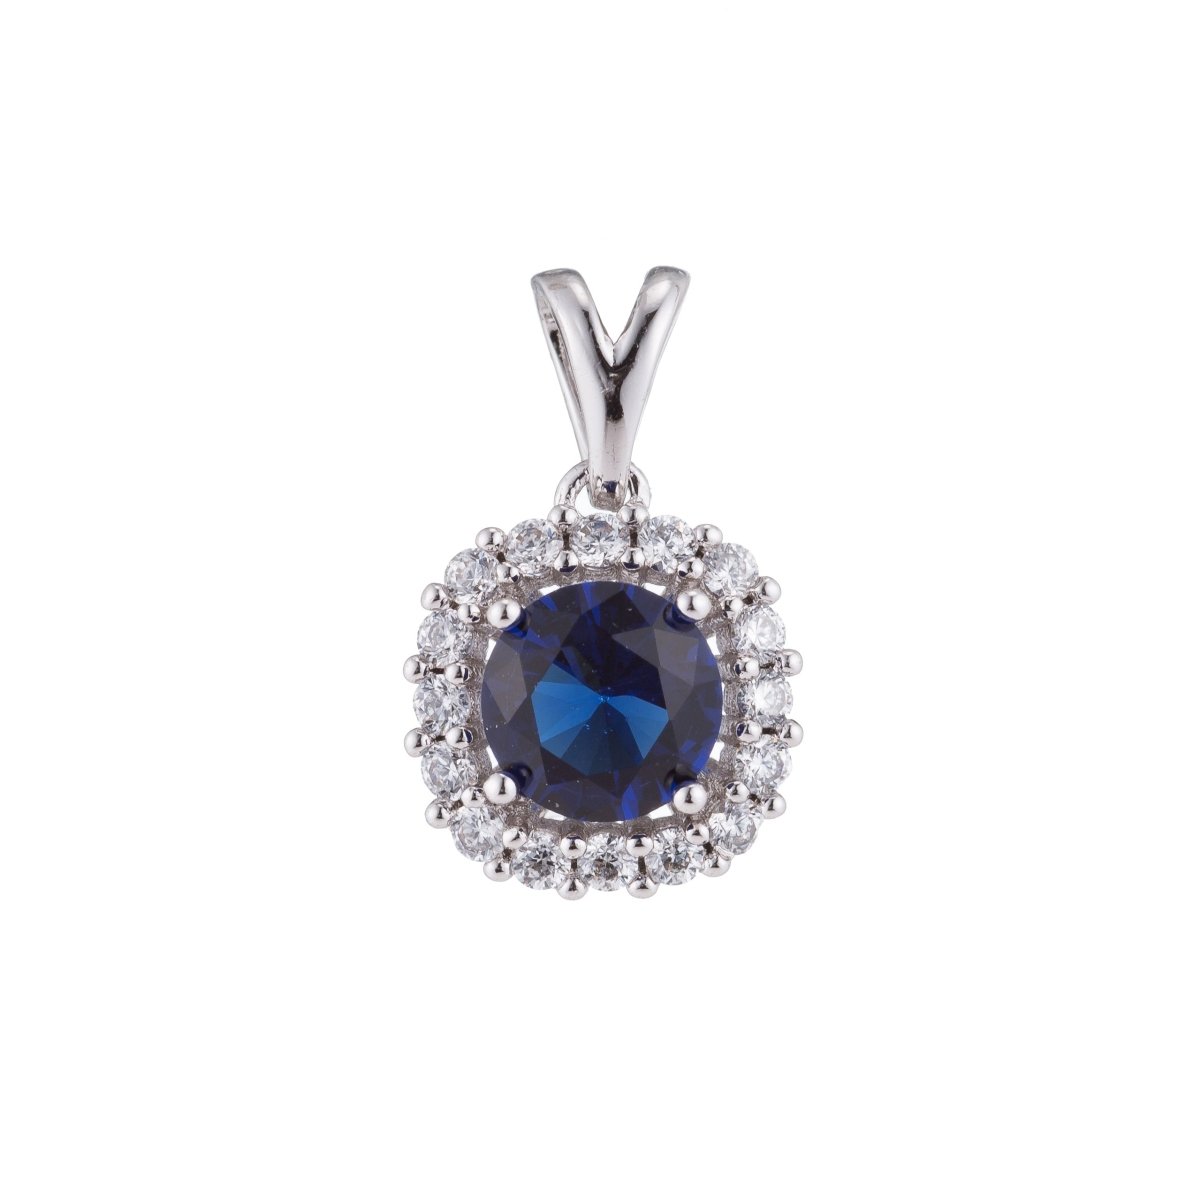 Silver Sapphire Blue Crystal, Diamond, Ladies Romantic Gift Cubic Zirconia Necklace Pendant Charm Bead Bails Findings for Jewelry Making H-094 - DLUXCA